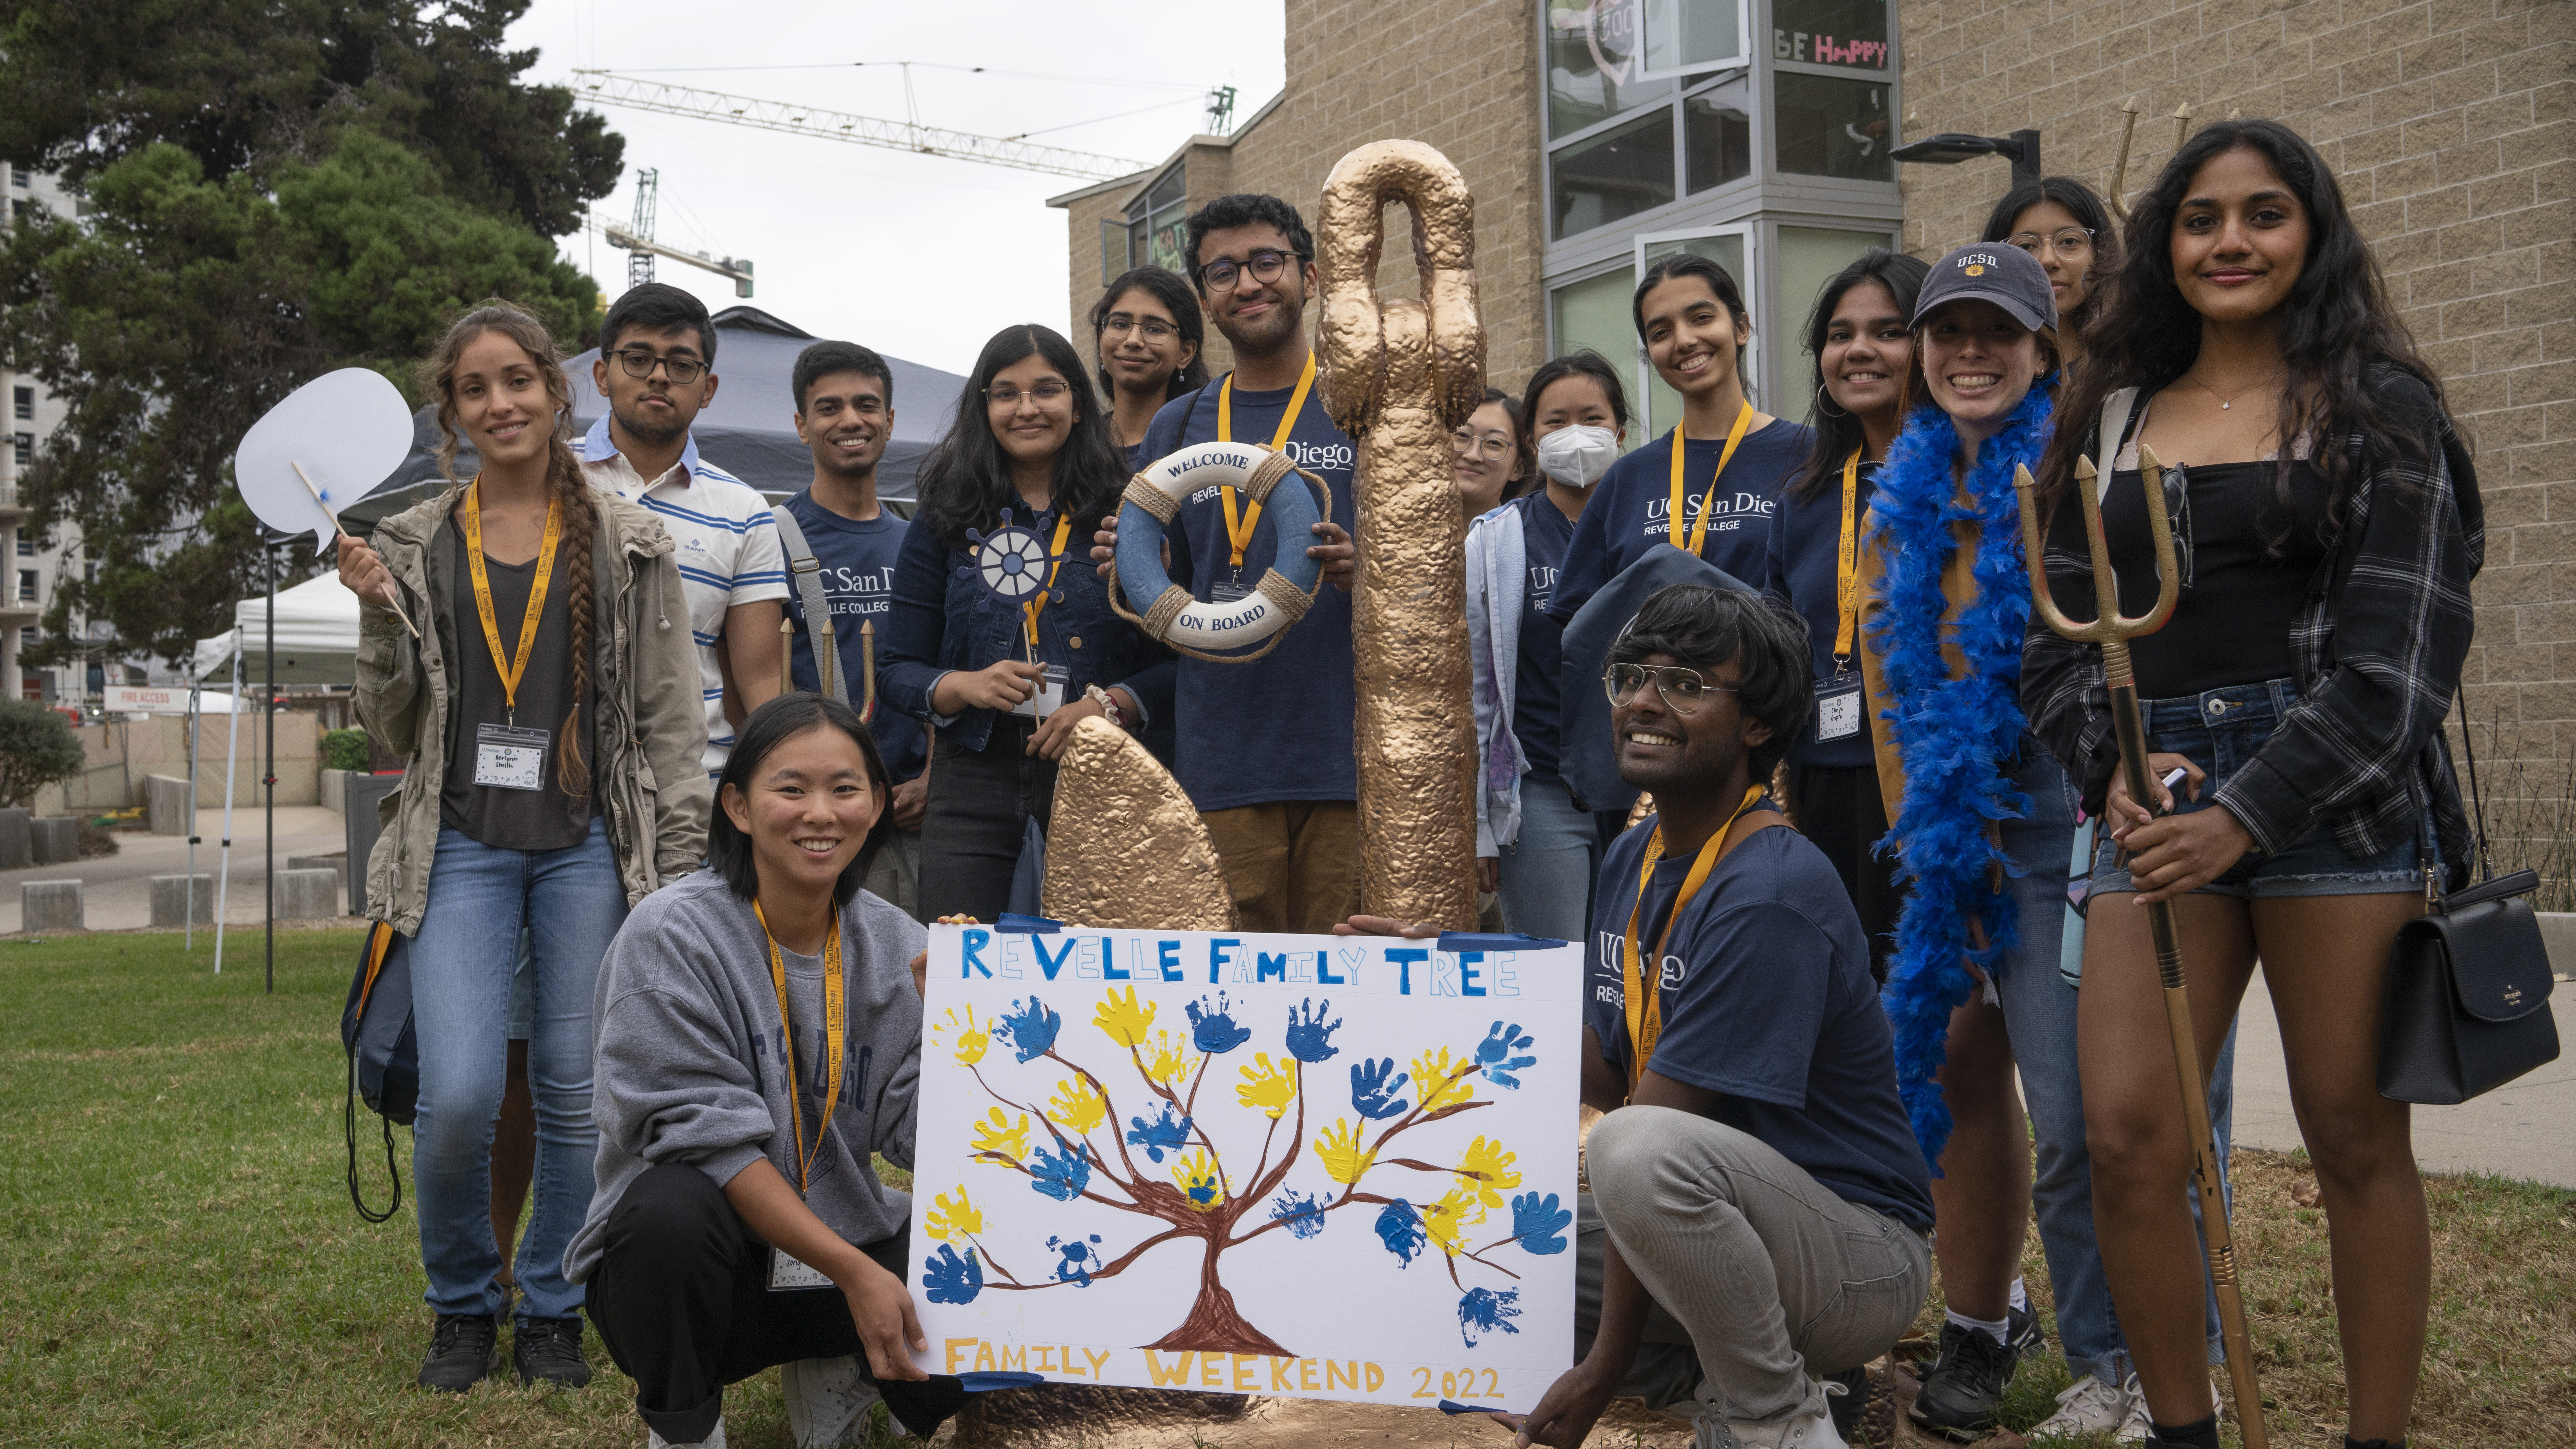 group of smiling students around Revelle anchor with family weekend poster